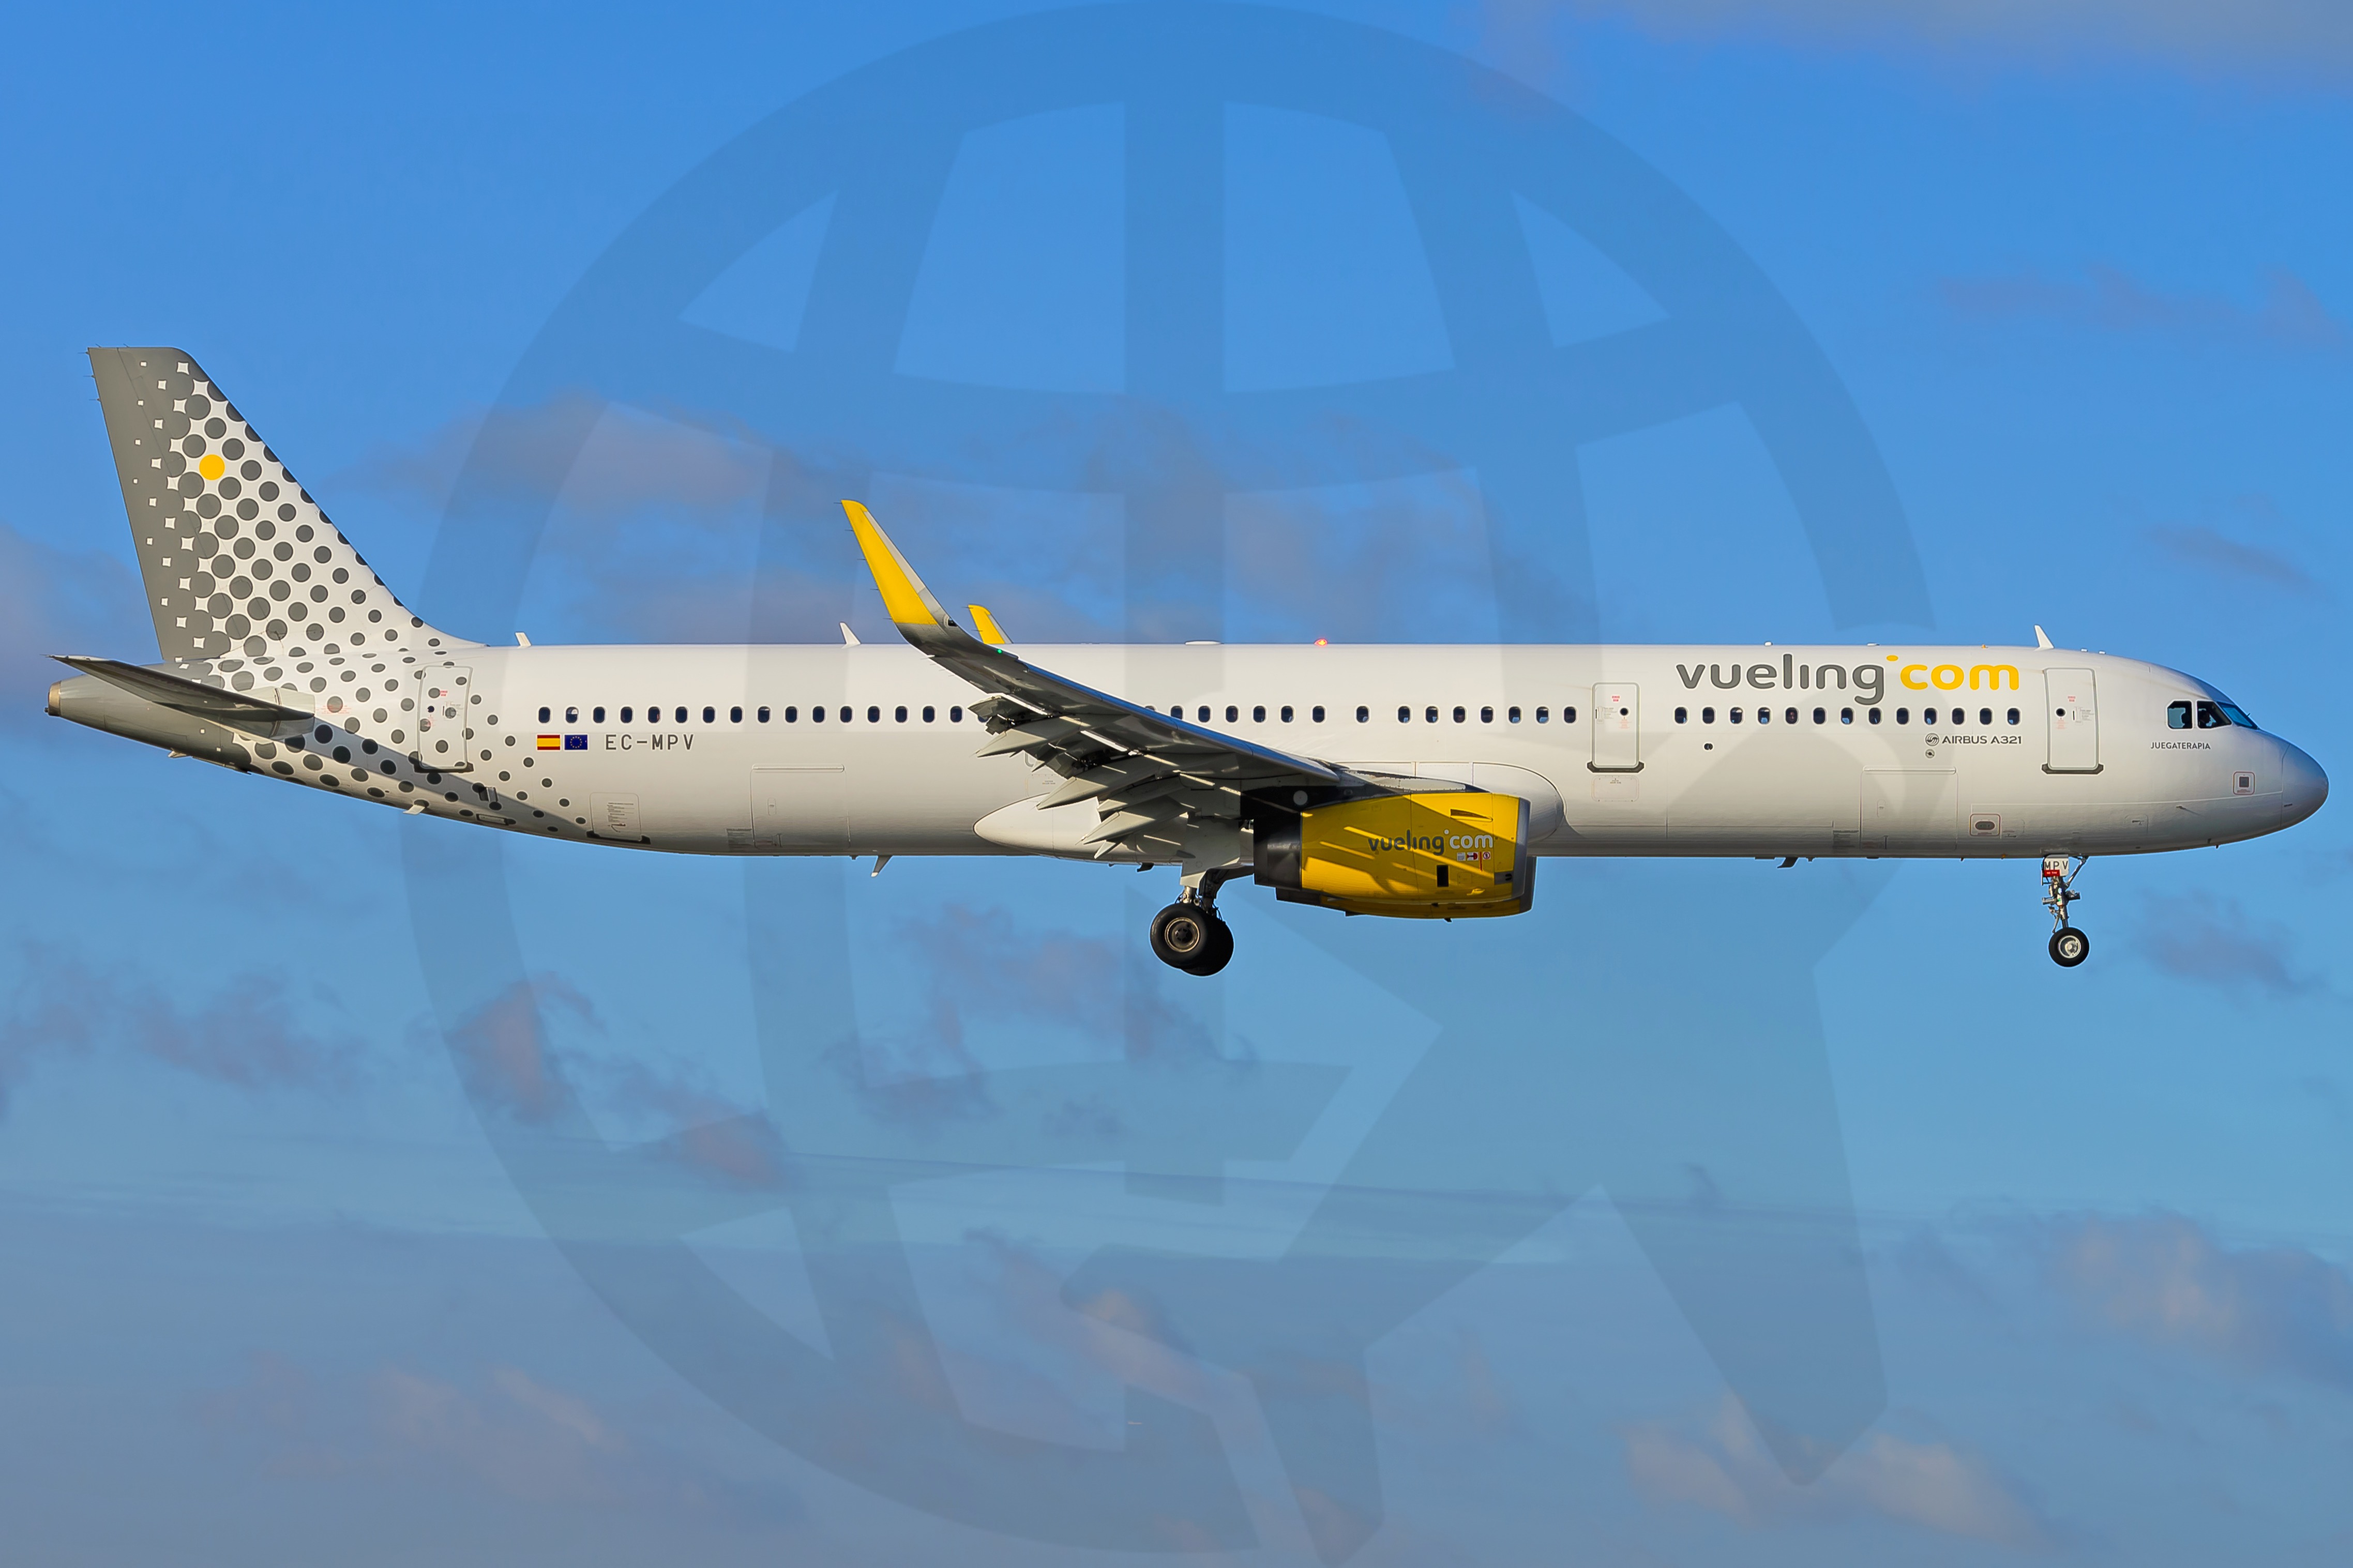 Photo of EC-MPV - Vueling Airbus A321-200 by 